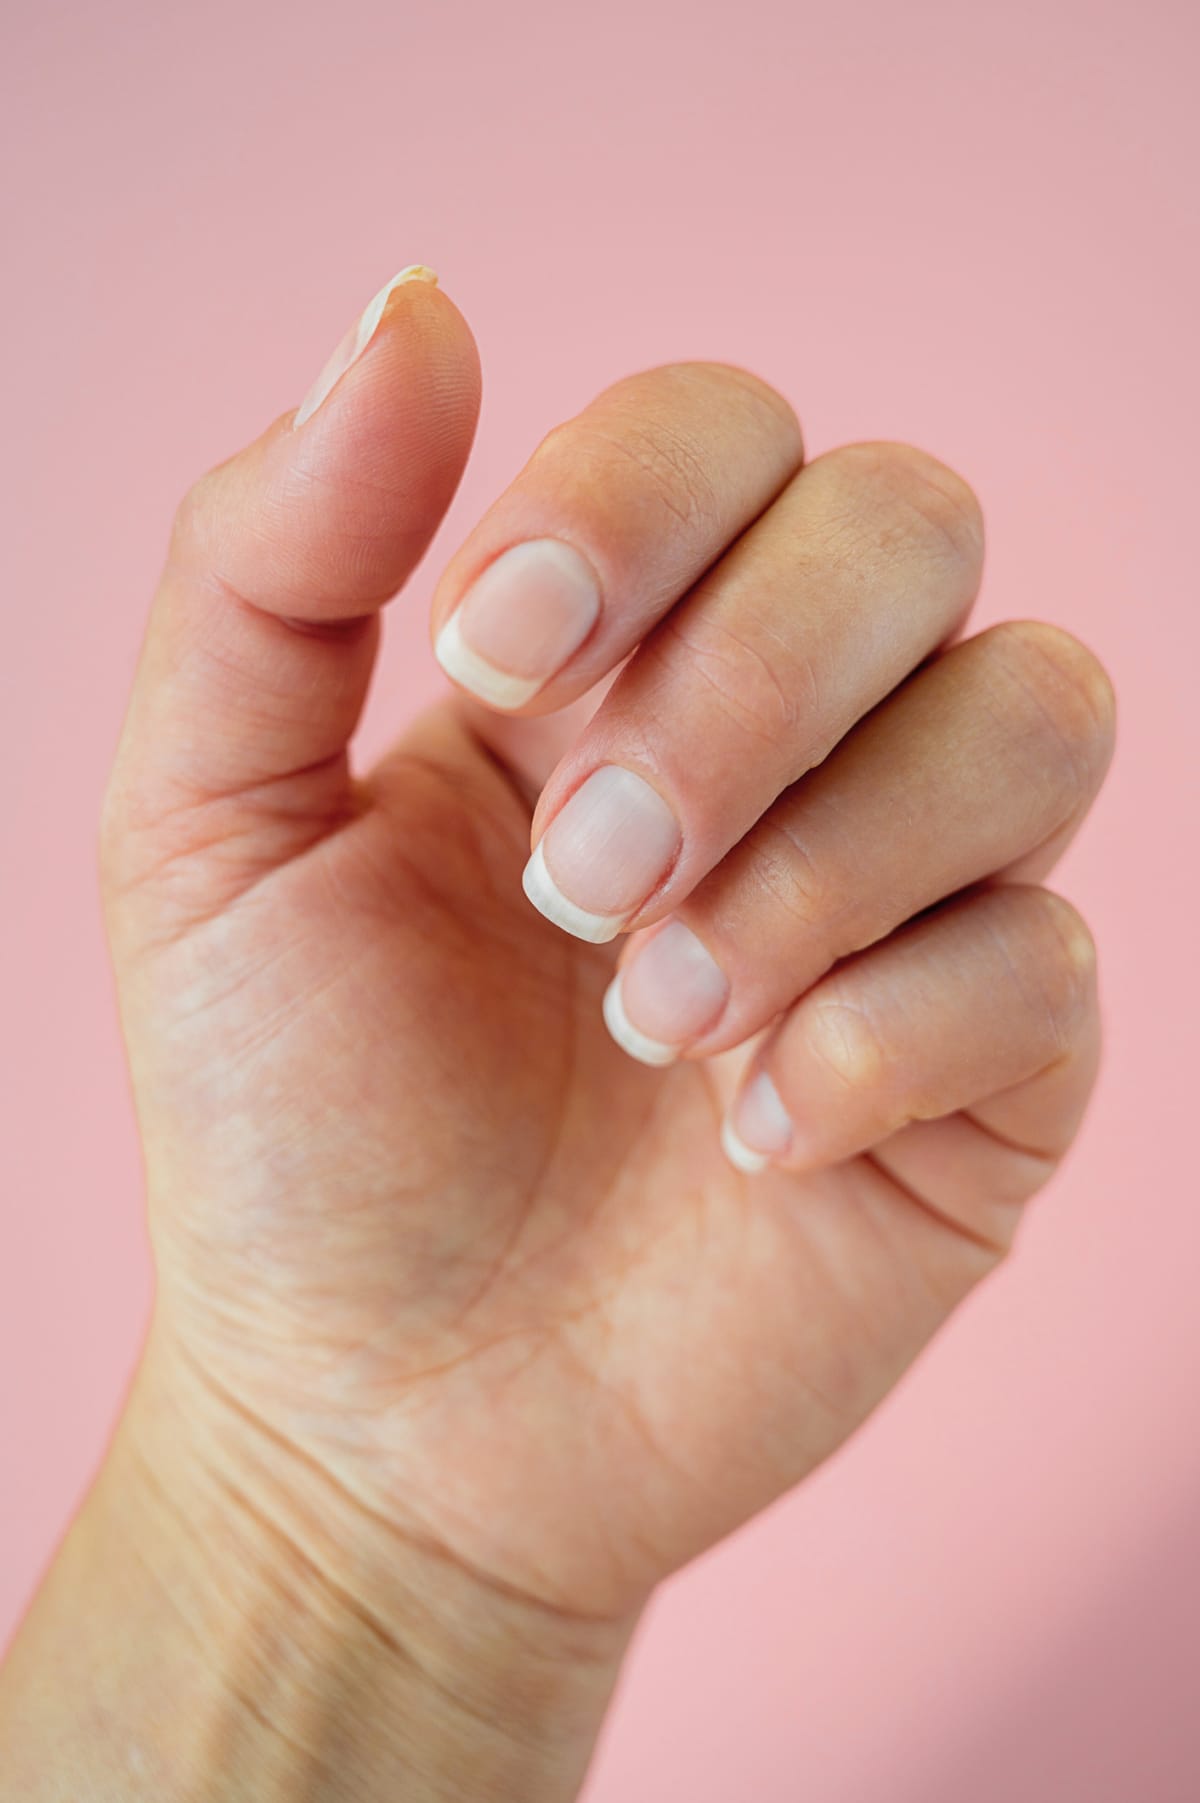 7 home remedies for yellow nails that really work! | TheHealthSite.com